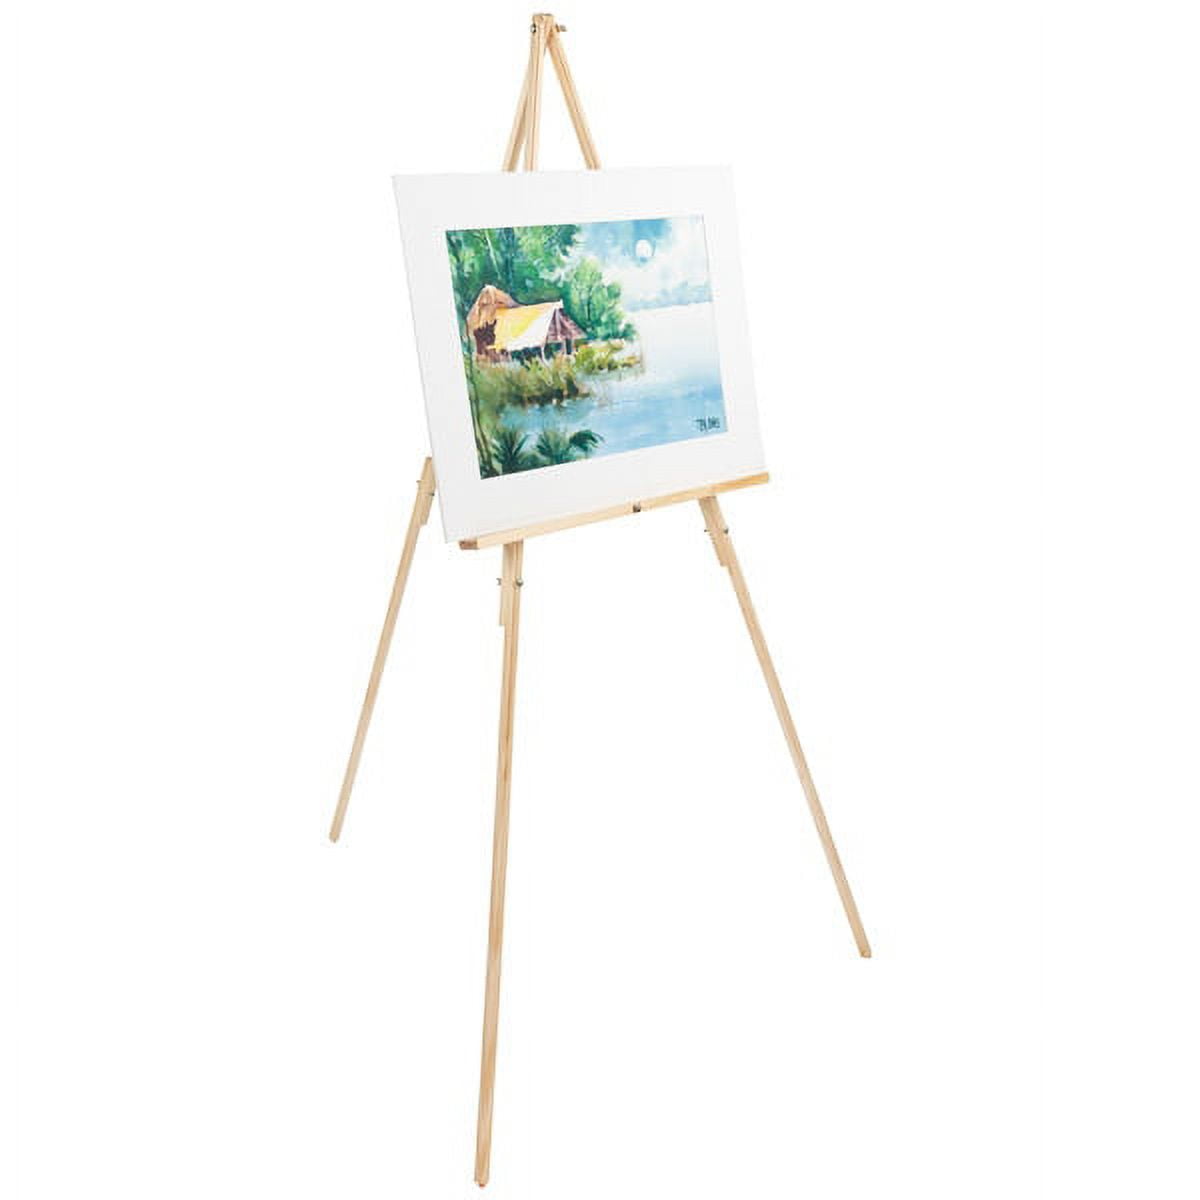 2 Packs Easel Stand for Display Wedding Sign Poster, 66 inch Folding  Portable Easel for Wedding Sign, Lightweight and Adjustable Easel Stand for  Signs